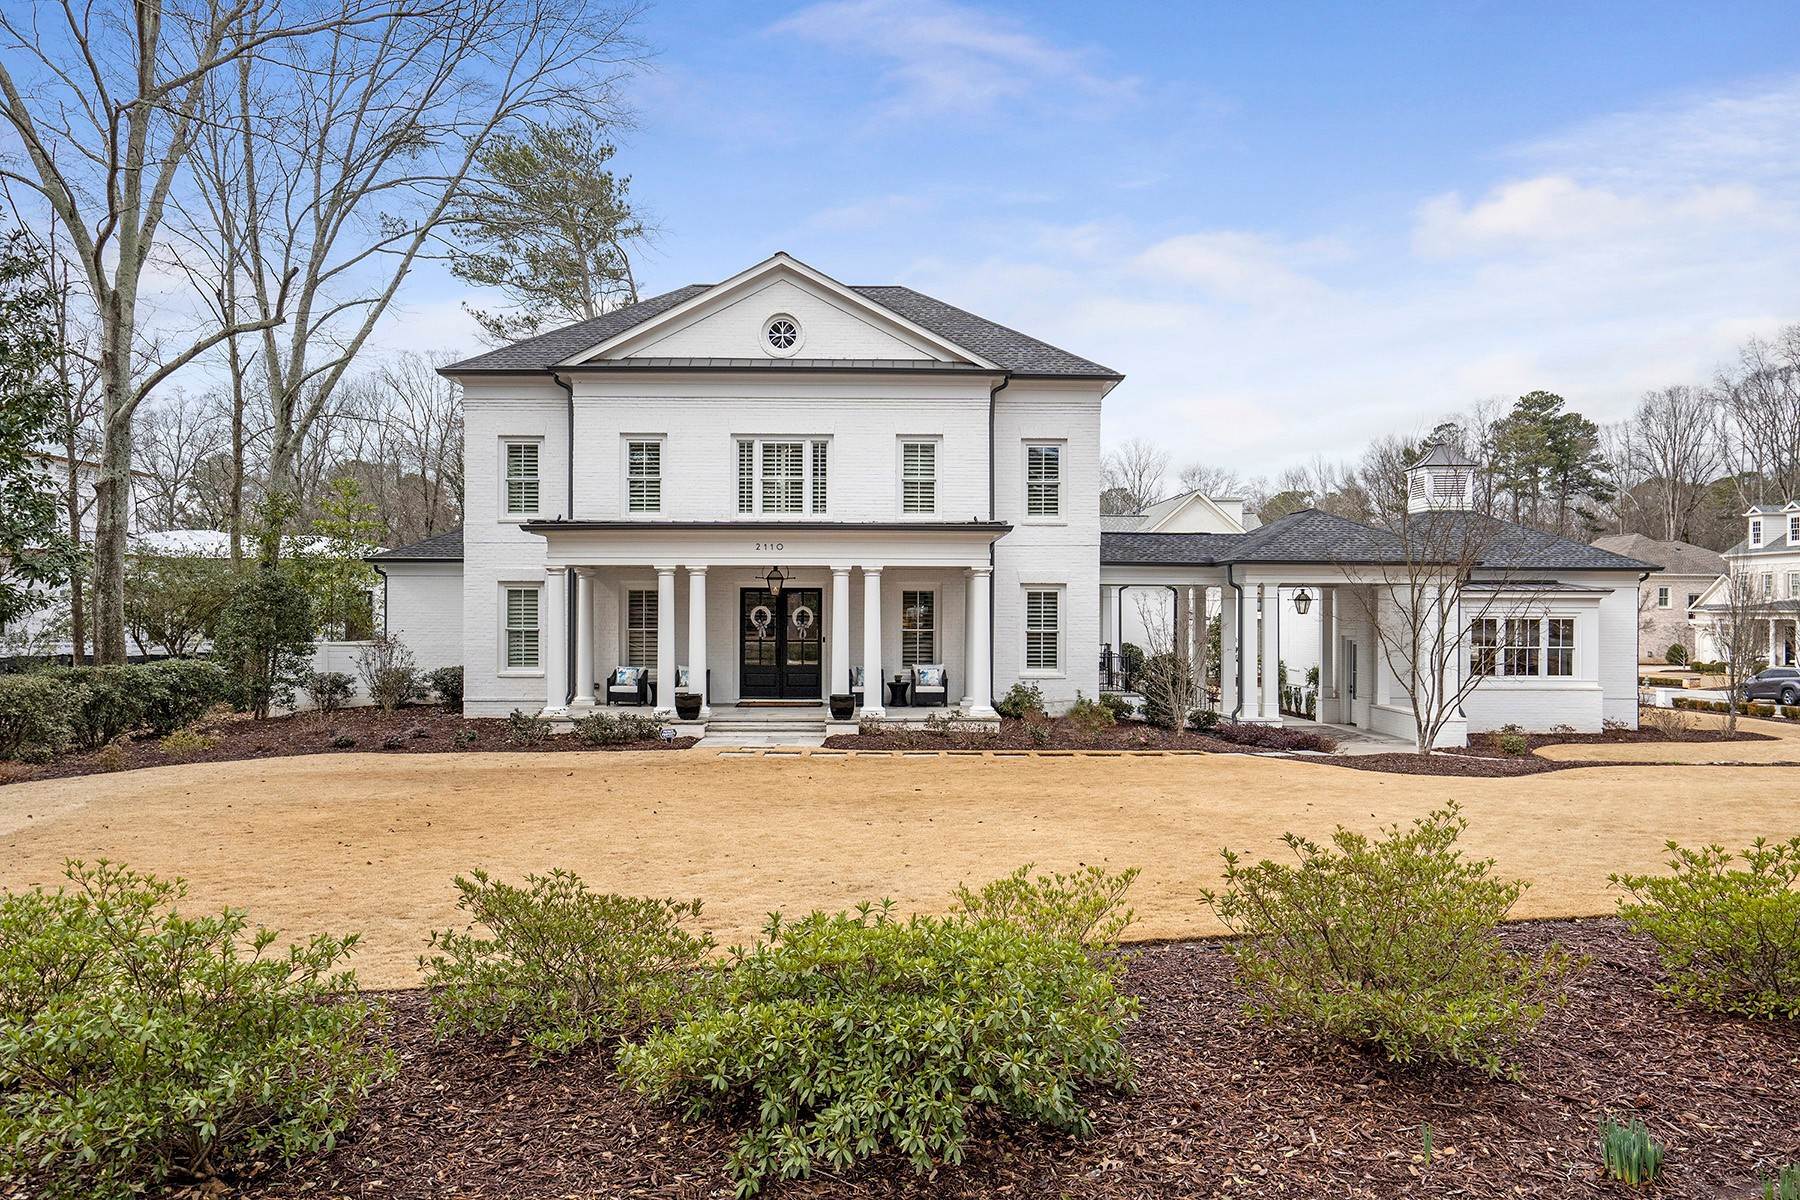 Single Family Homes for Sale at One-Of-A-Kind Opportunity in Alpharetta's Garden District 2110 Canton View Alpharetta, Georgia 30009 United States